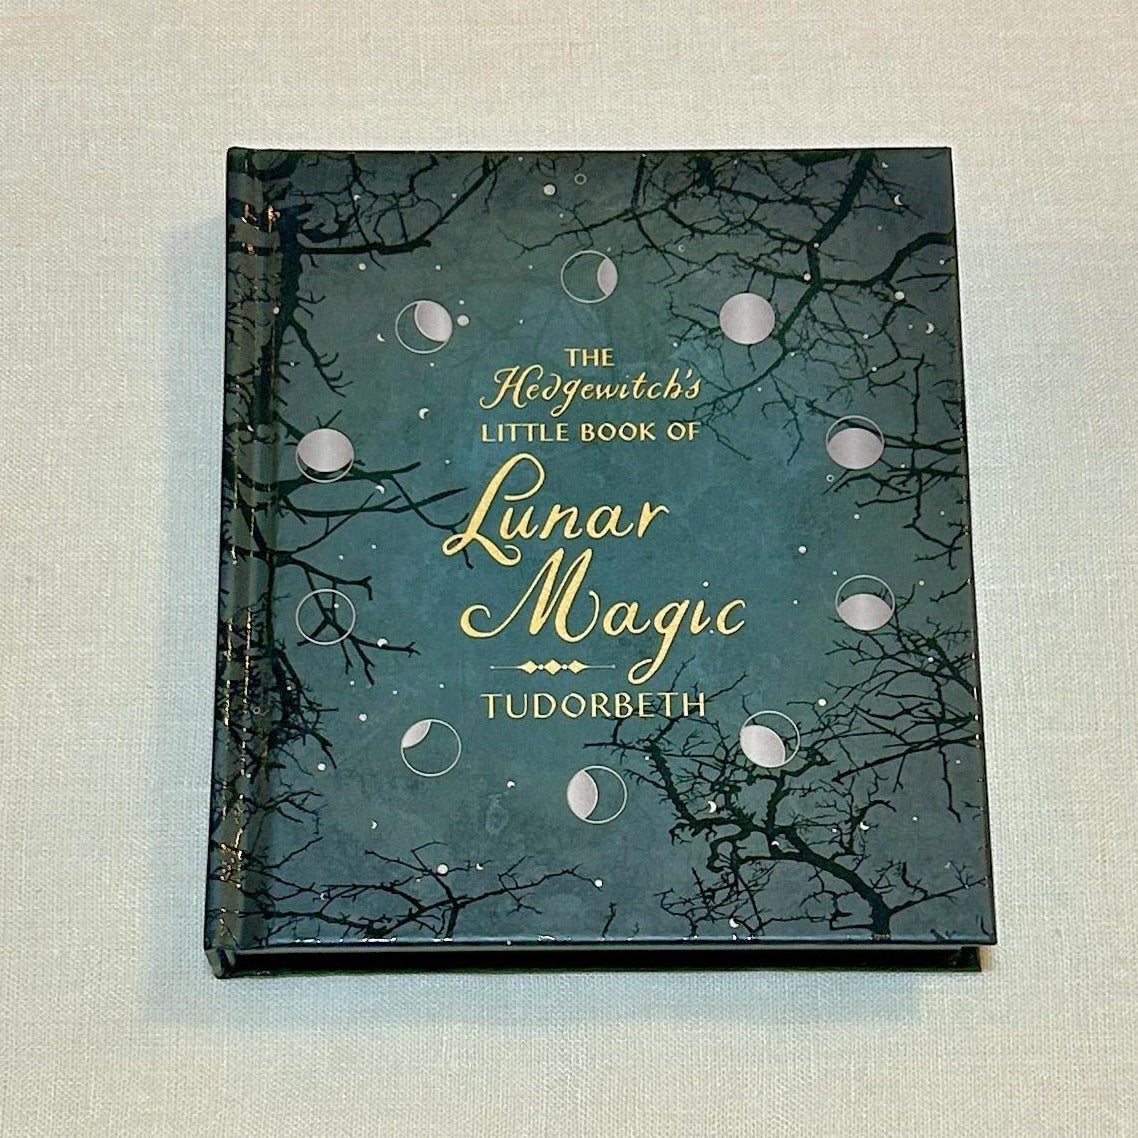 The Hedgewitch's Little Book of Lunar Magic. Discover lunar myths and legends as well as correspondences to herbs, crystals, and deities. You will also learn how to connect with changing energies in each season and moon phase. With guidance for drawing down the moon, making moon water, creating a moon altar, and other sacred activities, The Hedgewitch's Little Book of Lunar Magic features ample inspiration for honoring and harmonizing with this revered celestial body.